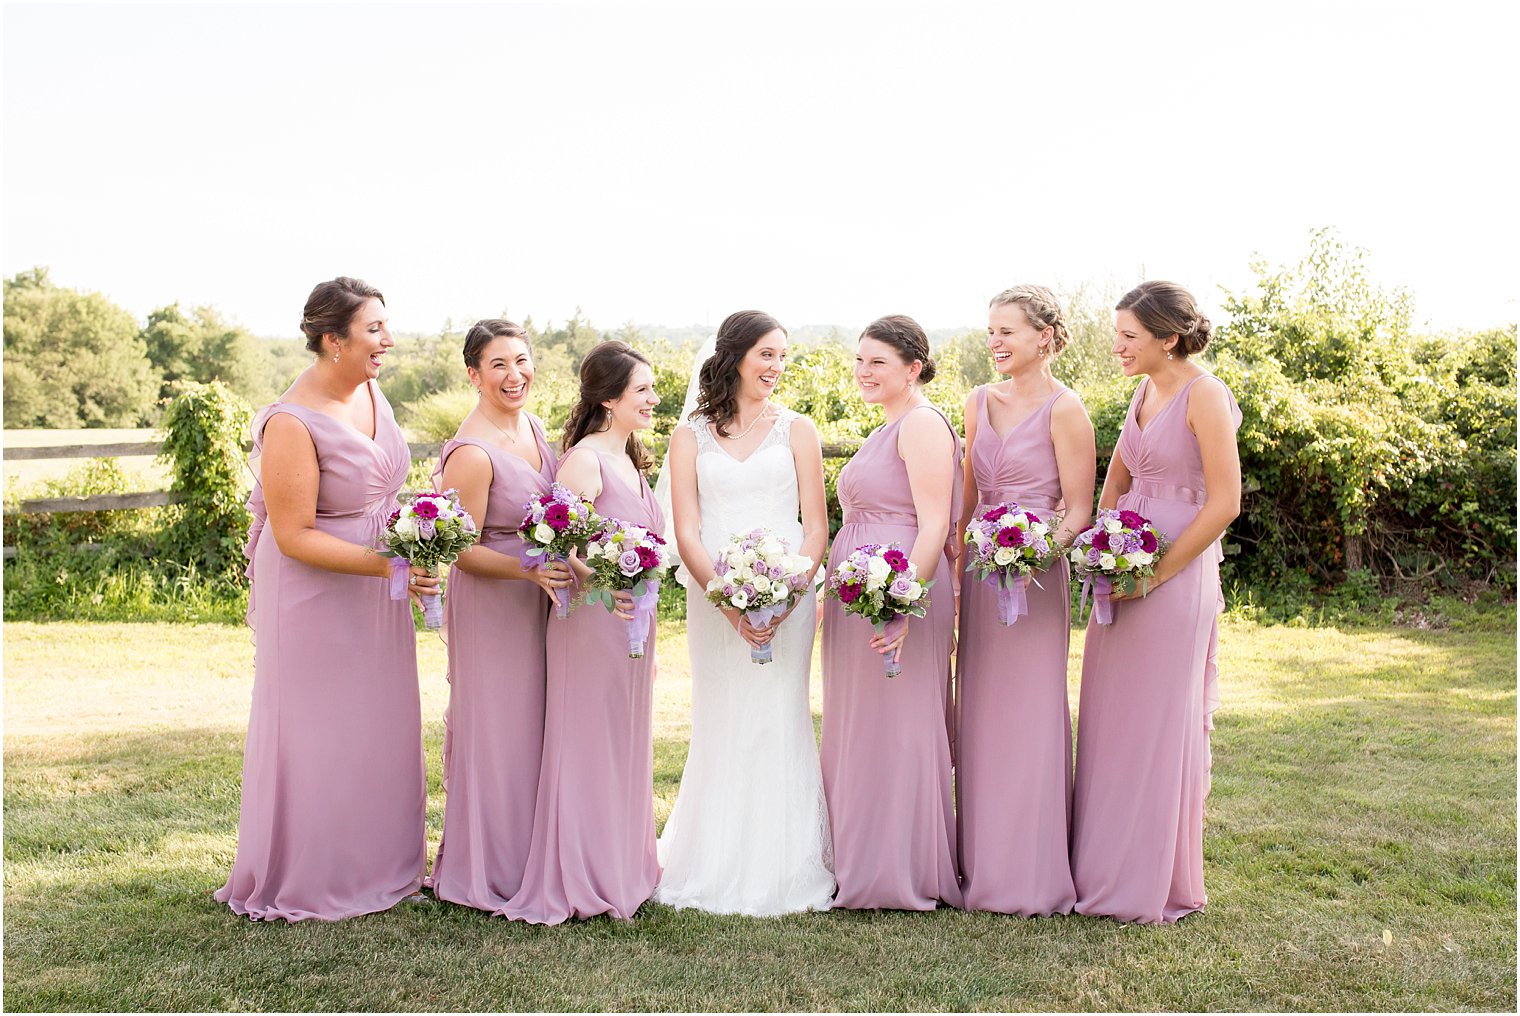 David S Bridal Real Bridesmaids Too Lovely Not To Share Facebook